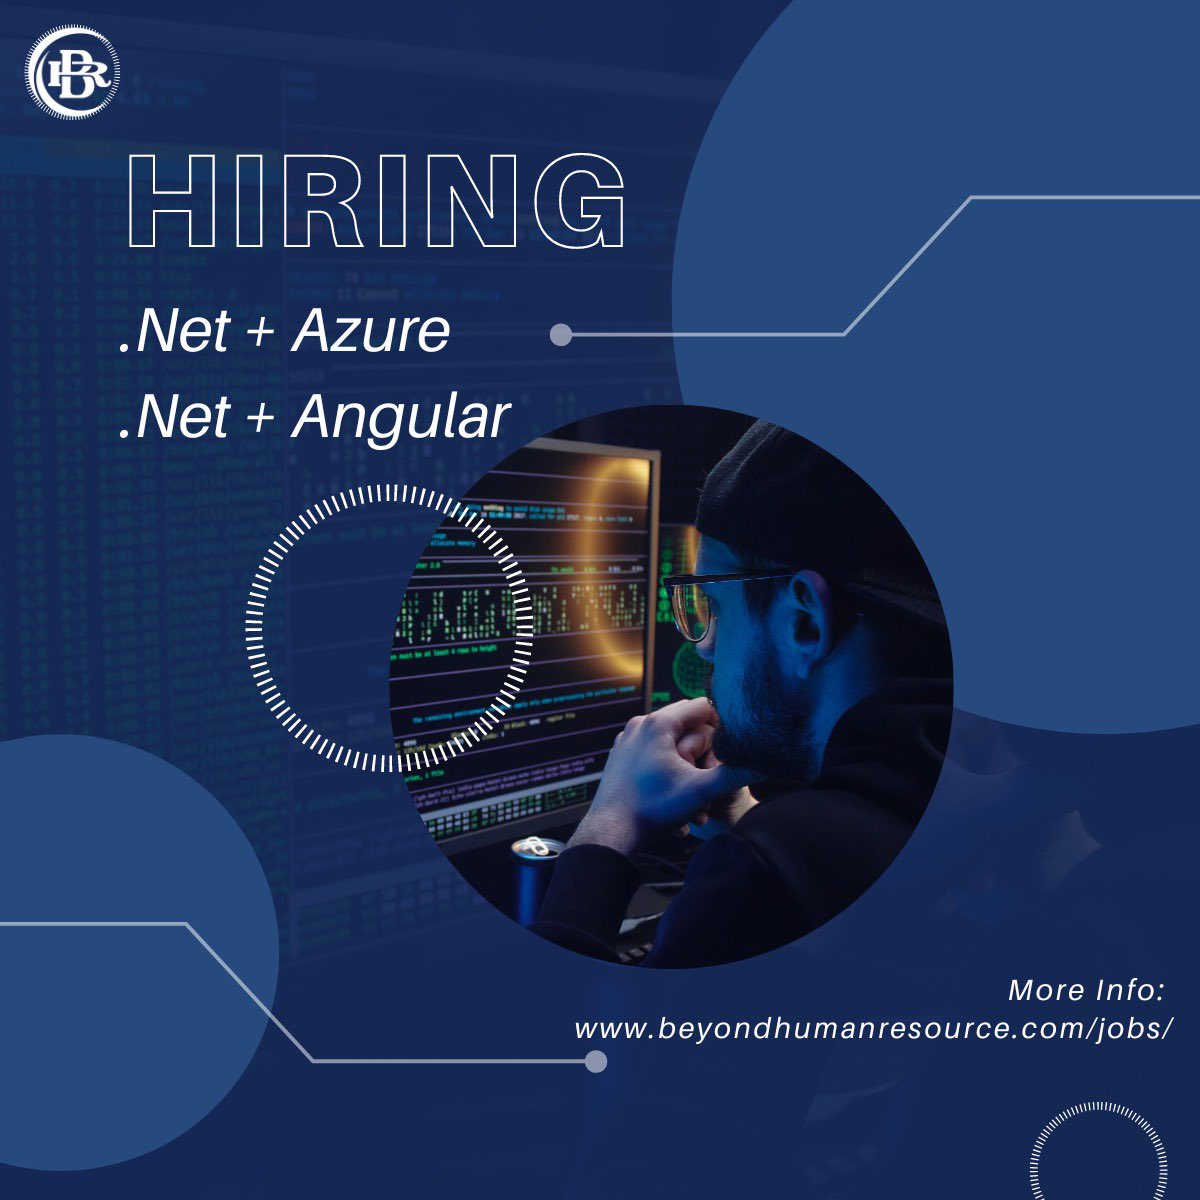 #opentowork ? #Hiring for .Net and #Azure, .Net and #Angular #developers for the #Bangalore

.Net and Azure apply here 👉 lnkd.in/dRmEuY2j

.Net and Angular apply here 👉
lnkd.in/dnjfhfuJ

#hiringforbhr #opentoworkwithbhr #lookingtoworkwithbhr #dotnet #rabbitmq